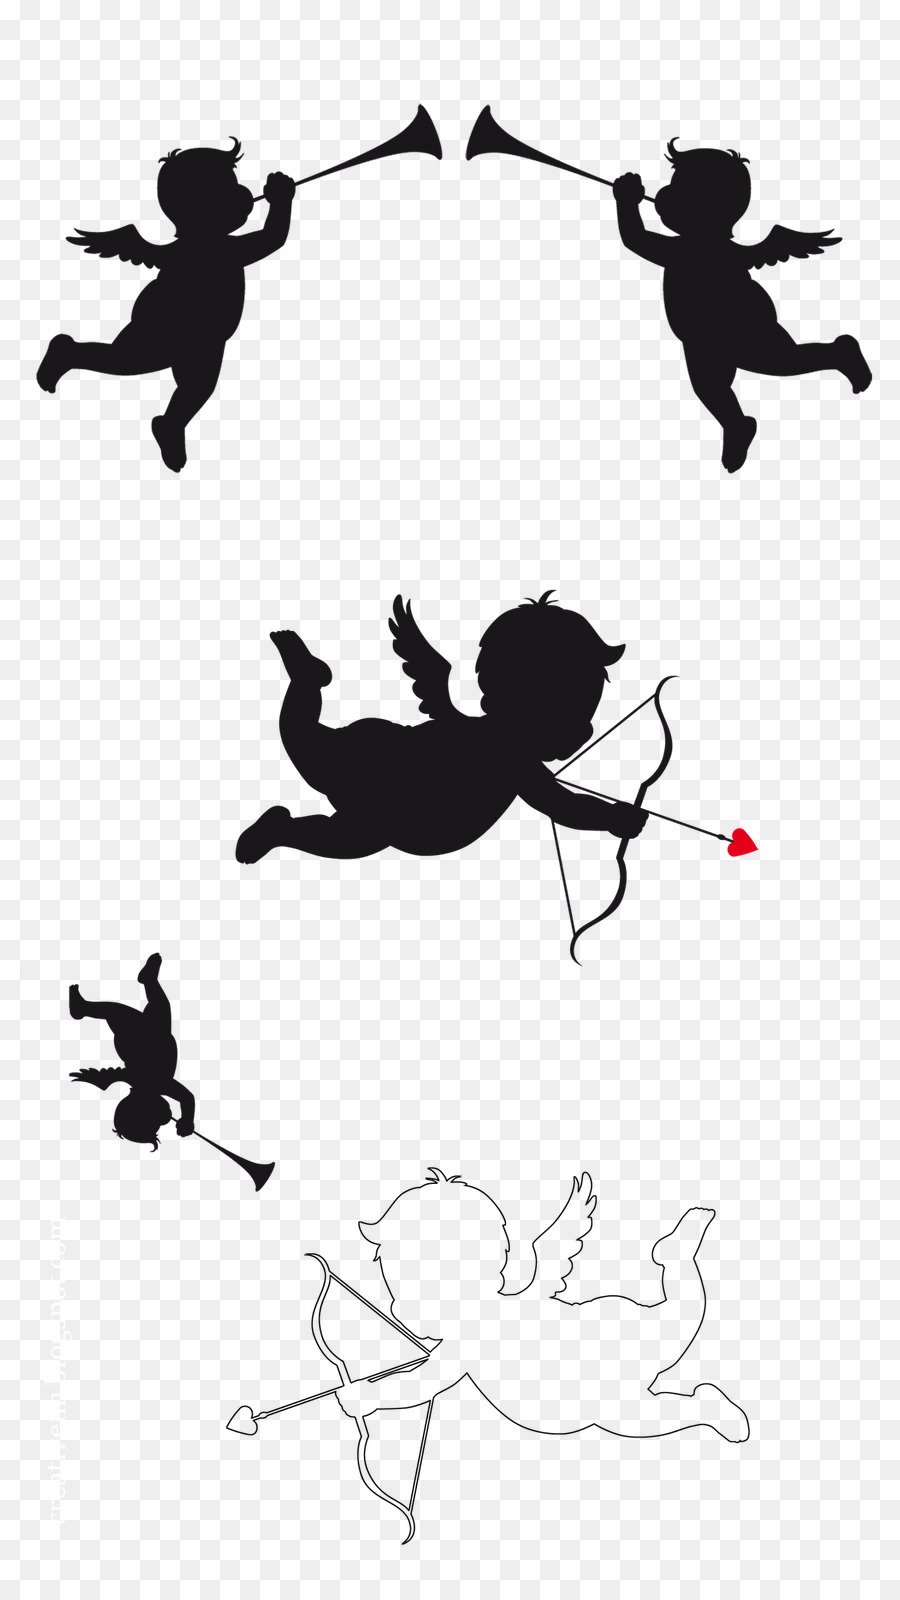 Cupid and Psyche Silhouette - cupid vector png download - 859*1600 - Free Transparent Cupid And Psyche png Download.